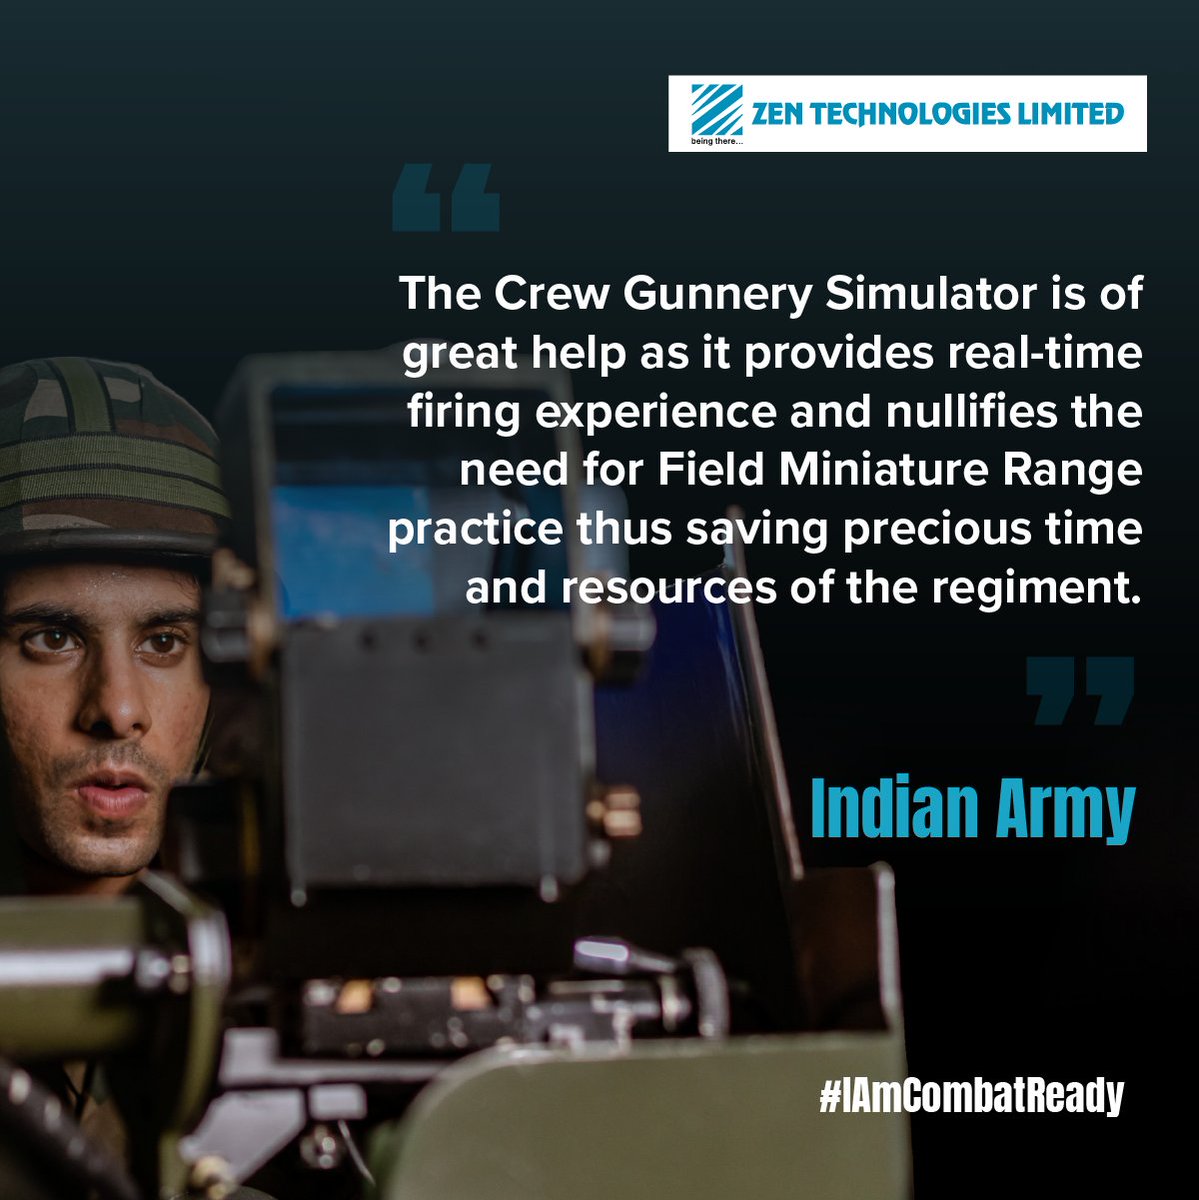 Our brave soldiers have spoken! The Crew Gunnery Simulator by Zen Technologies is a game-changer according to the Indian Army. Come, train and win with Zen! Visit website: zentechnologies.com/allproducts/cu… #iamcombatready #combatreadysoldiers #trainwithzen #zenacts #tanktraining